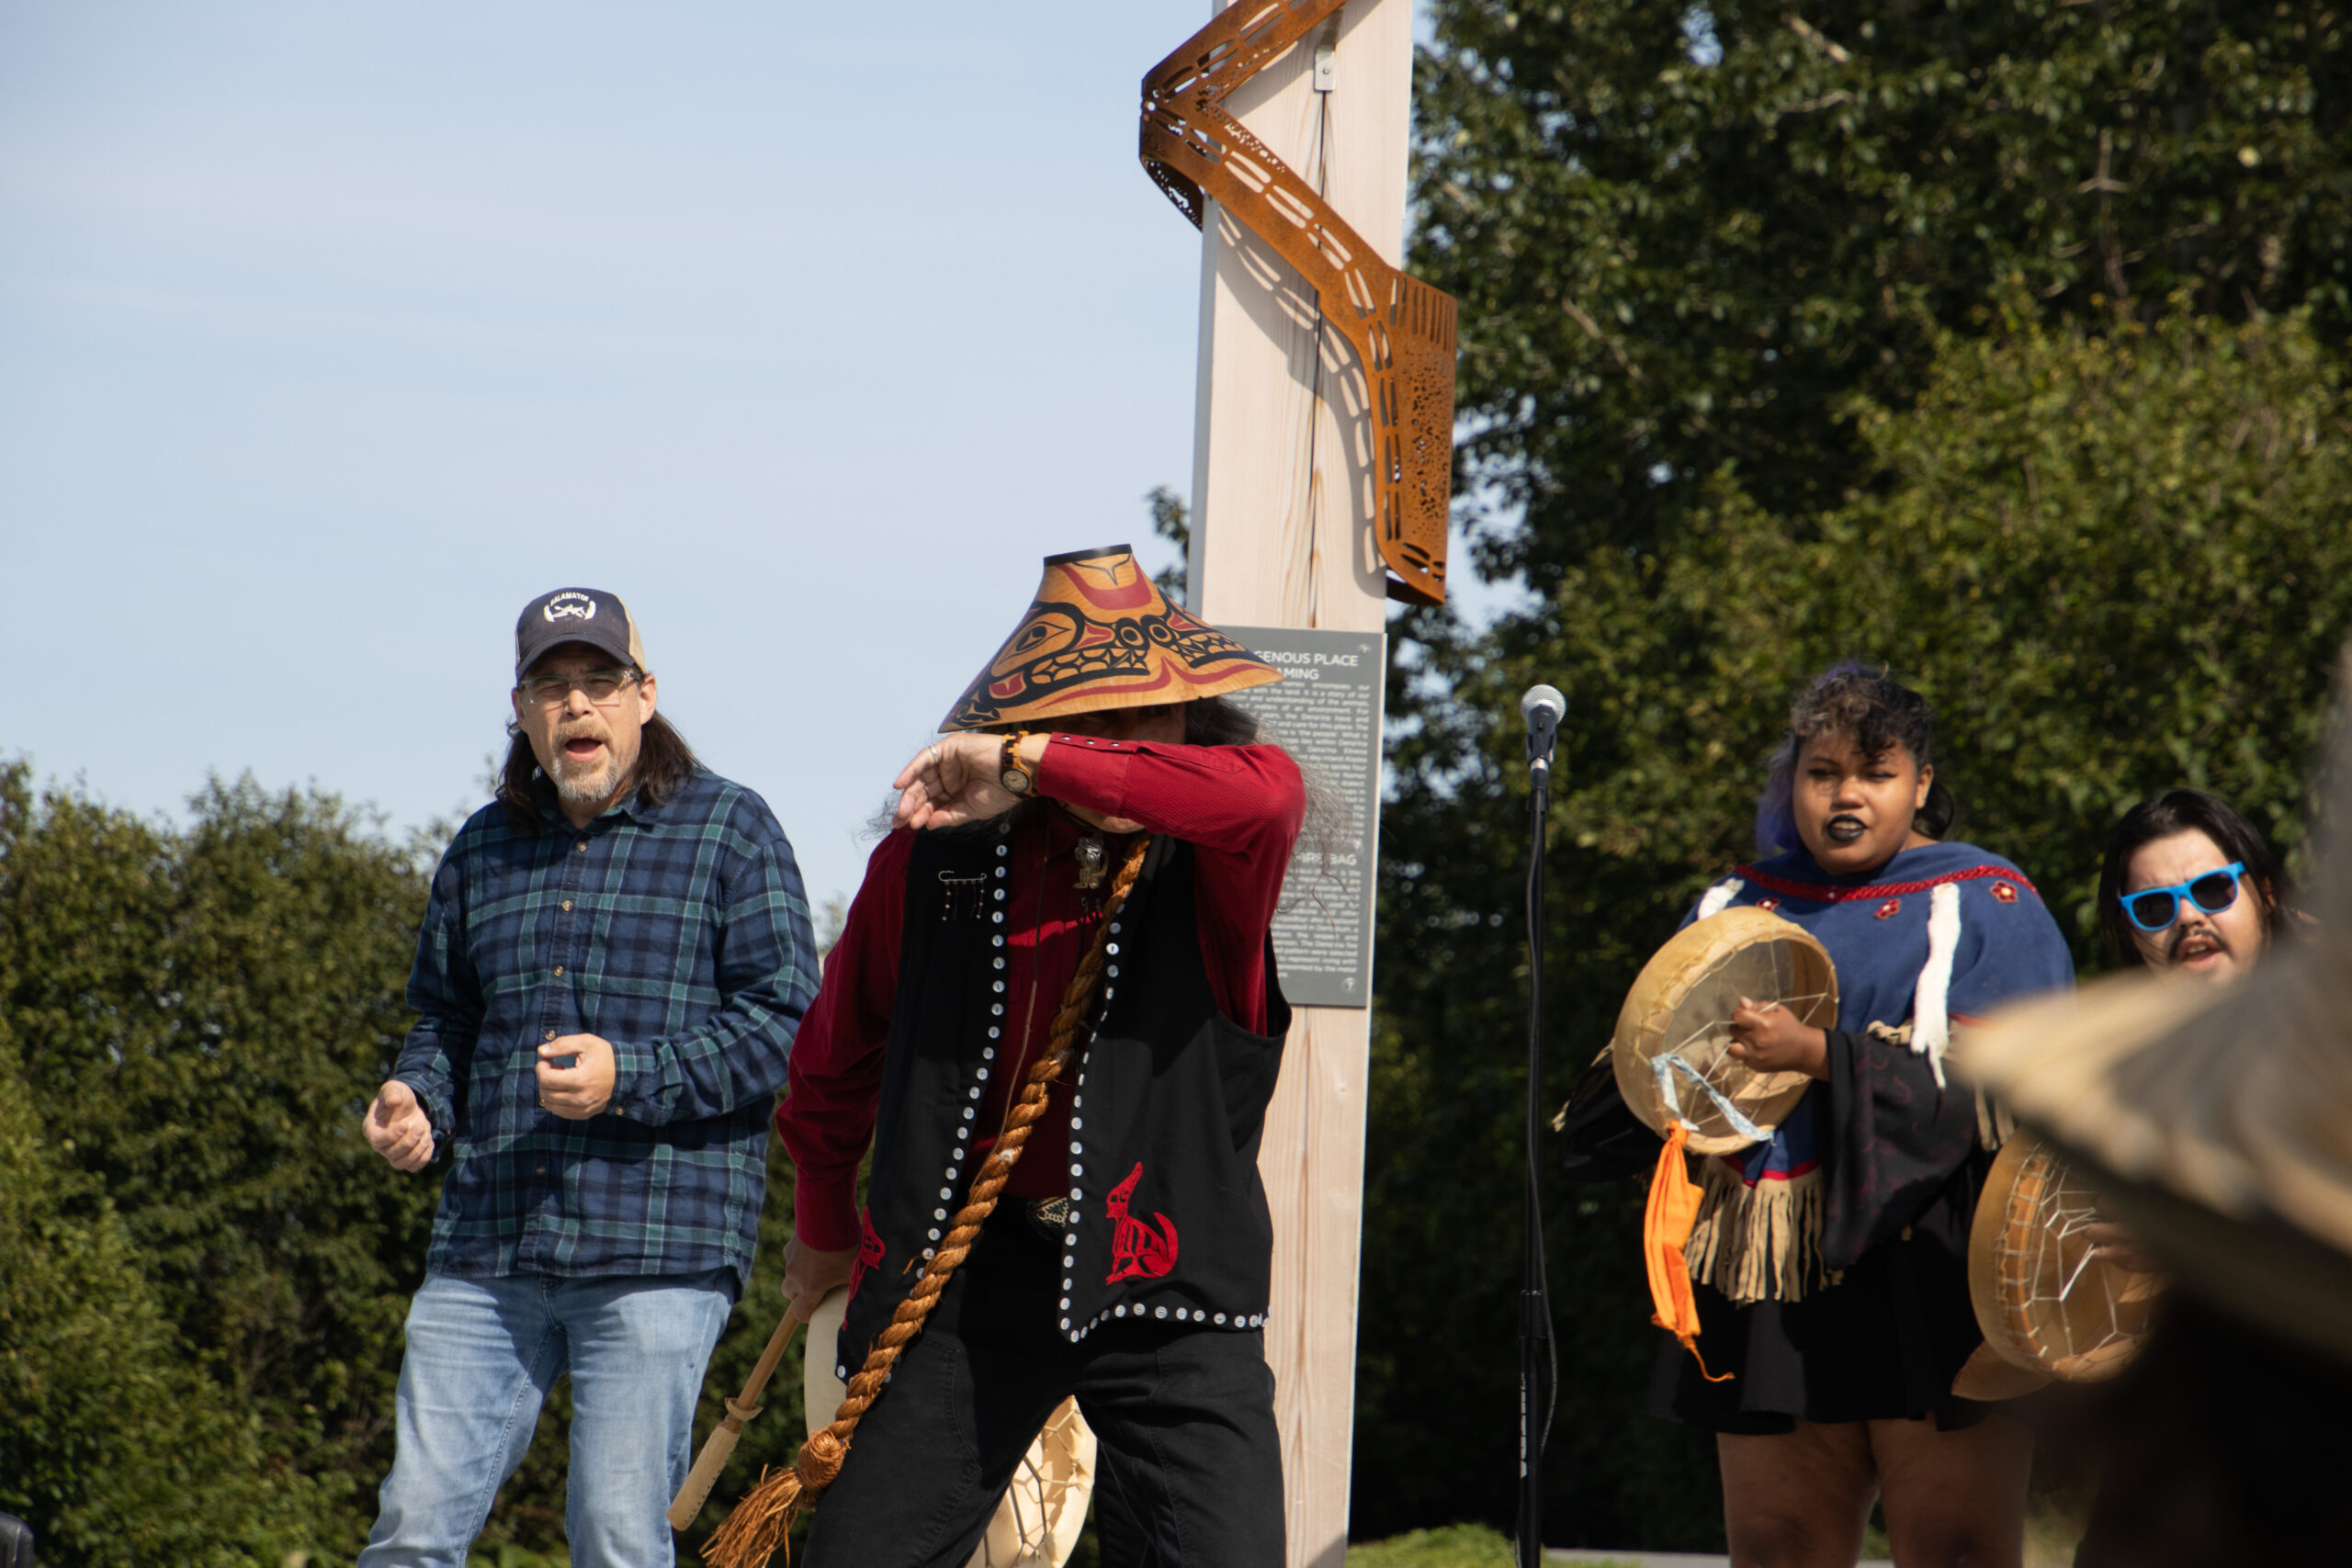 A Man dressed in Tsimshian regalia dances in front of a crowd as other tribe members perform at a signpost unveiling.